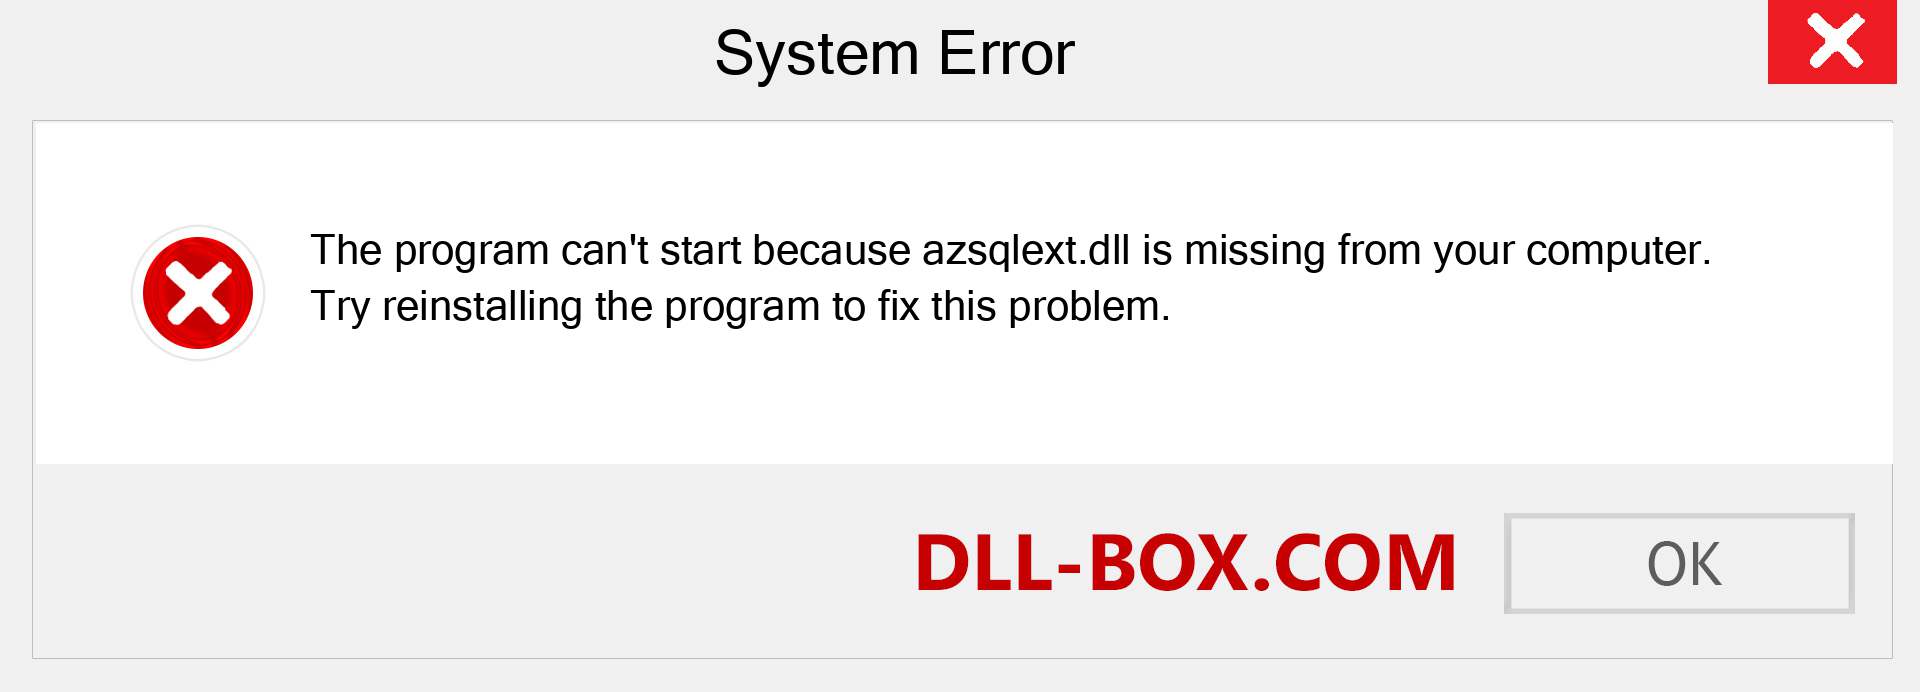  azsqlext.dll file is missing?. Download for Windows 7, 8, 10 - Fix  azsqlext dll Missing Error on Windows, photos, images